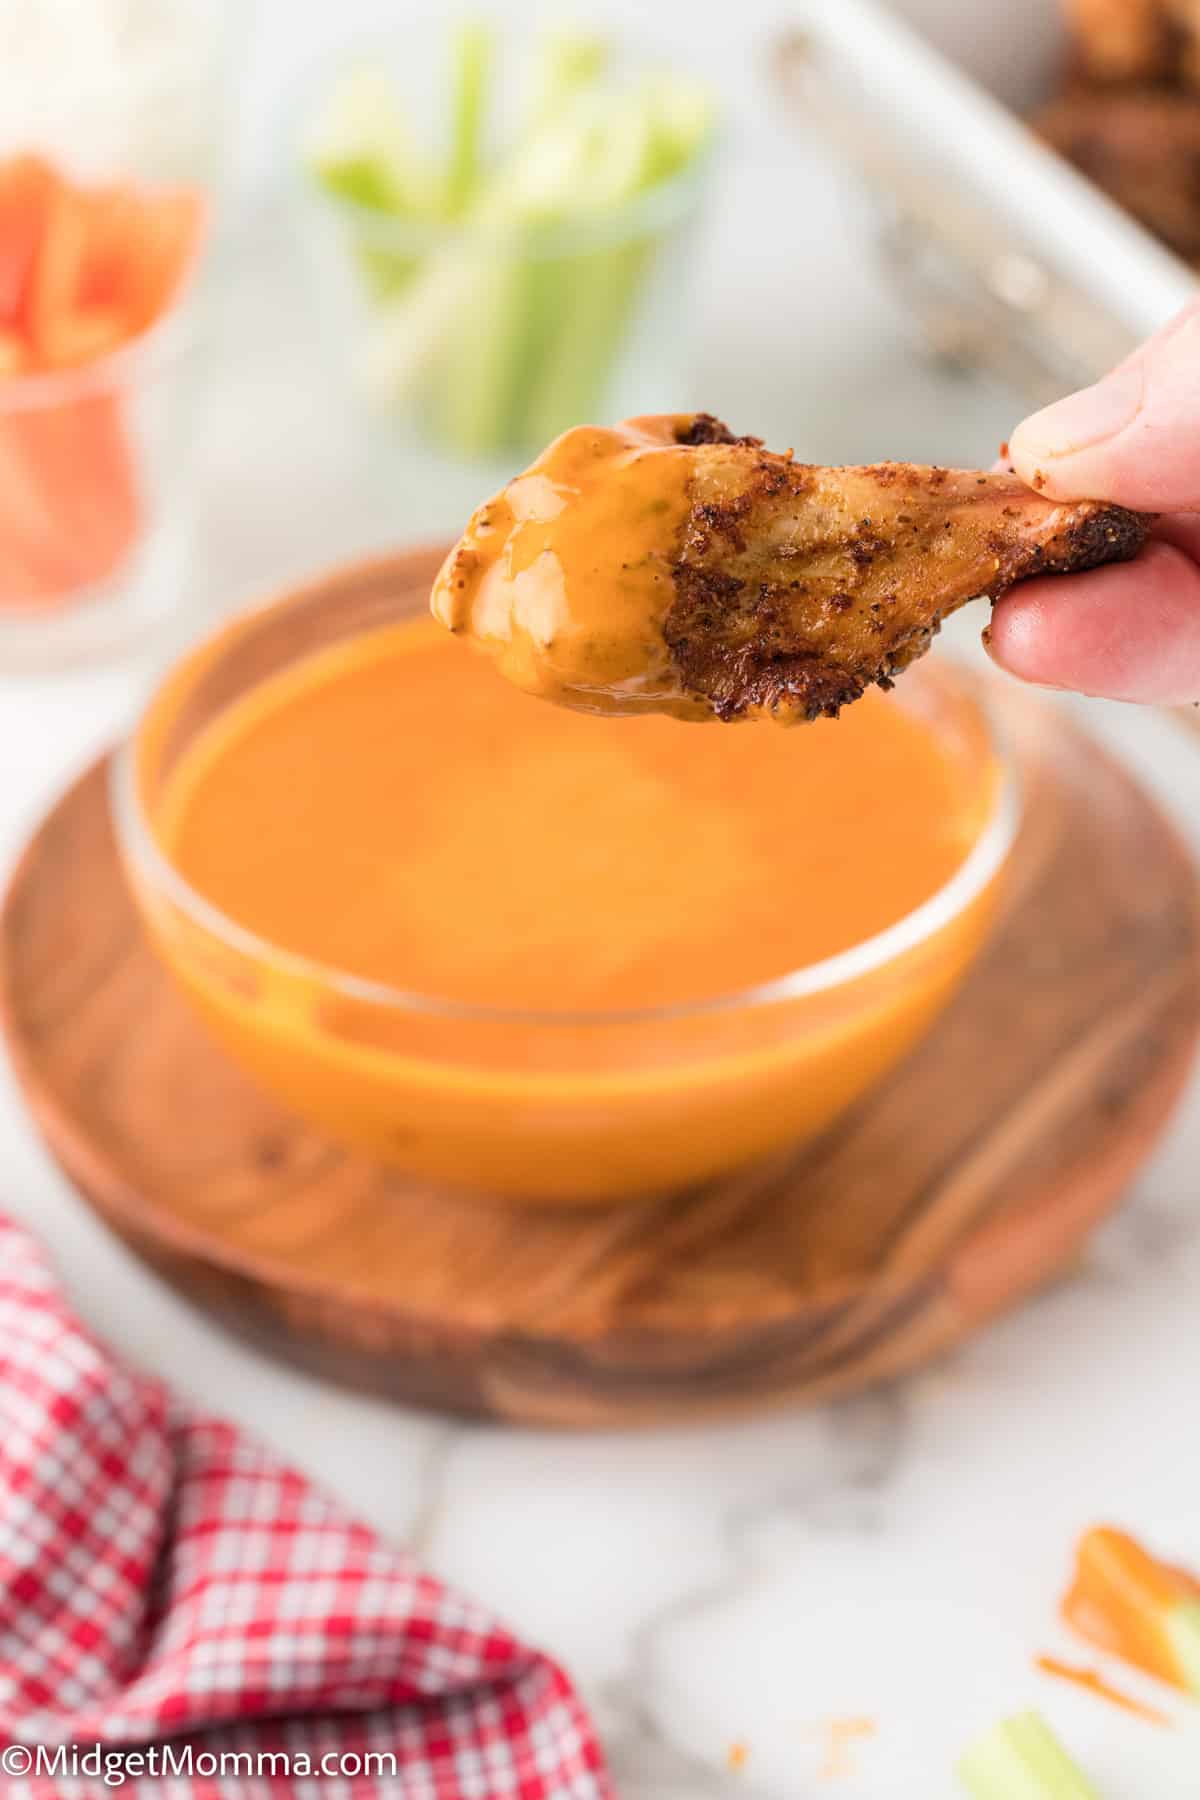 chicken wing coated in homemade buffalo sauce 